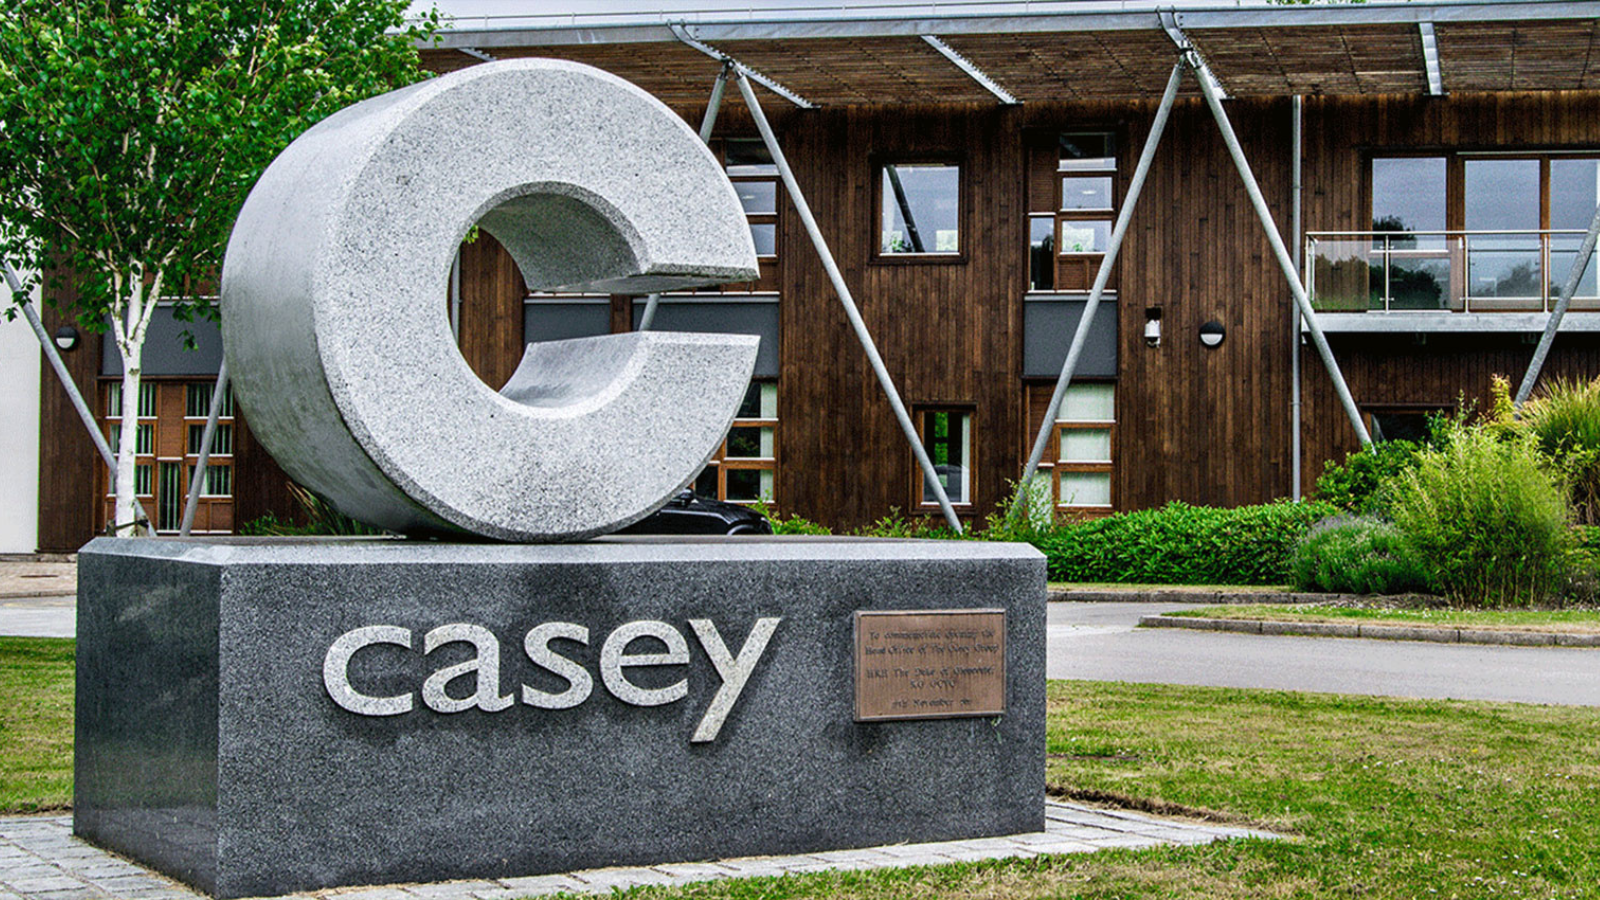 Casey Appoint Positive Planet as Sustainability Consultants